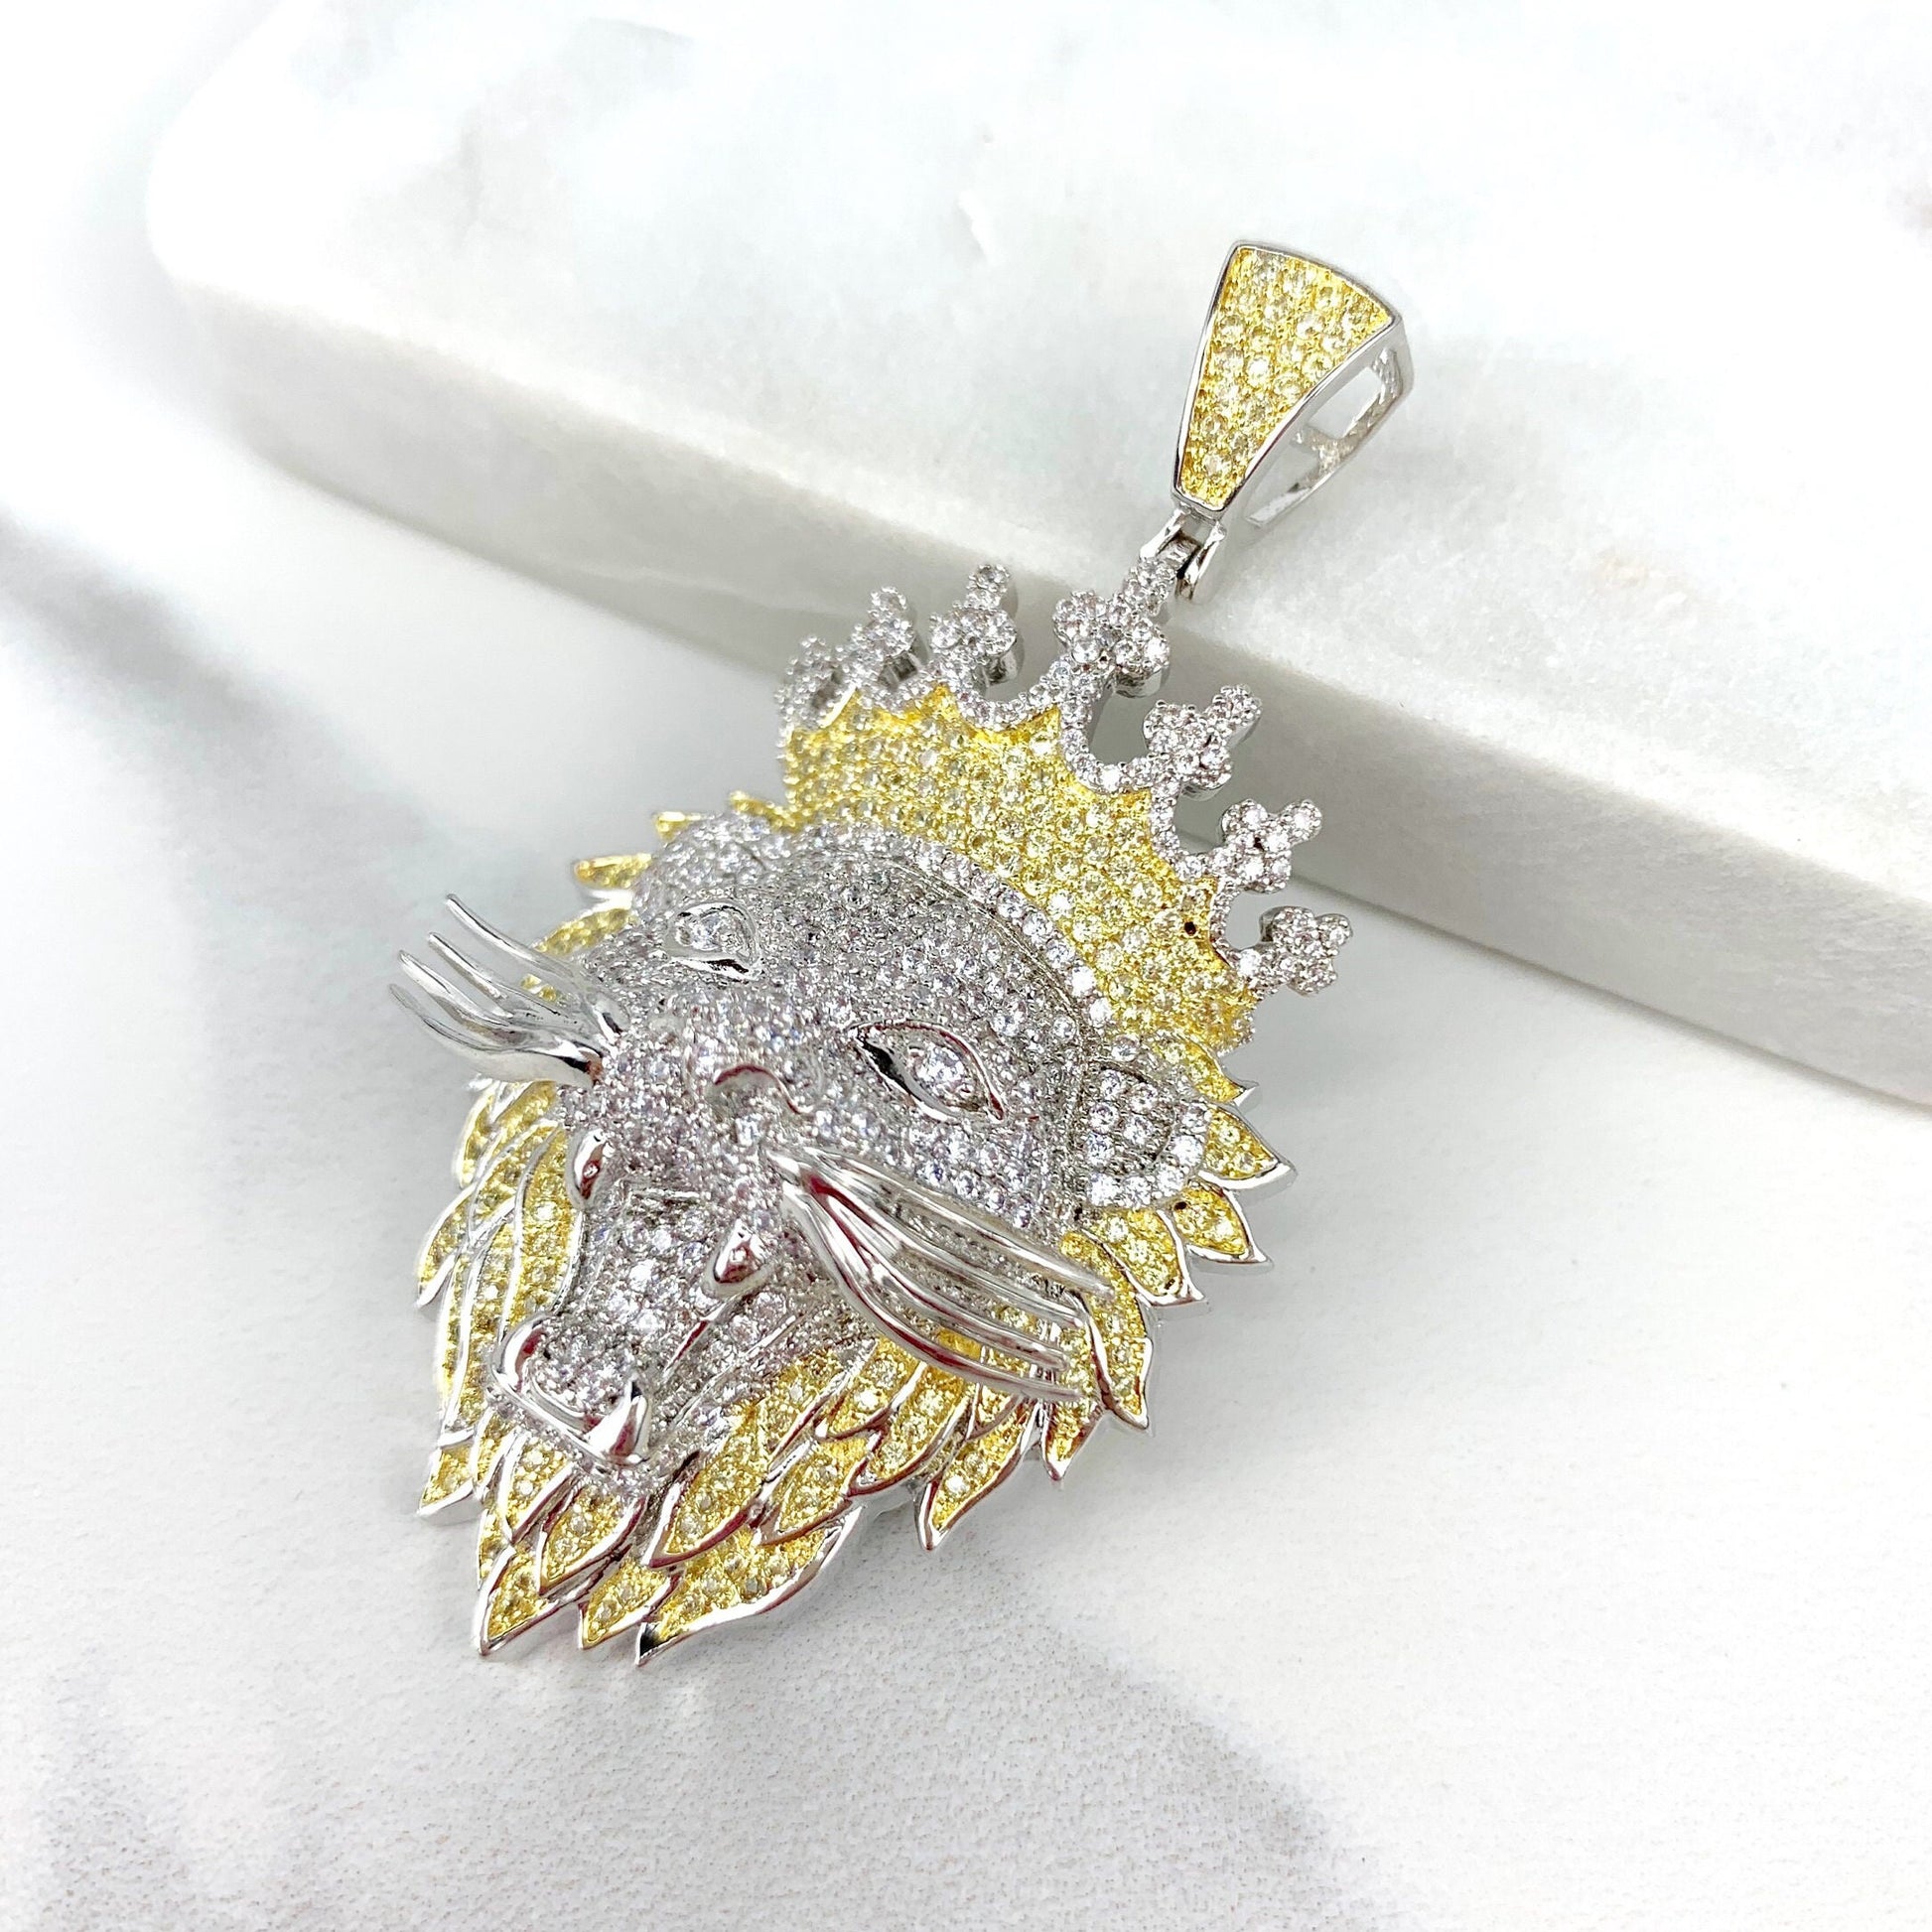 18k Gold Filled Micro Pave Cubic Zirconia Lion Head With Crown Pendant, Hip Hop, Men's Jewelry, Wholesale Jewelry Making Supplies